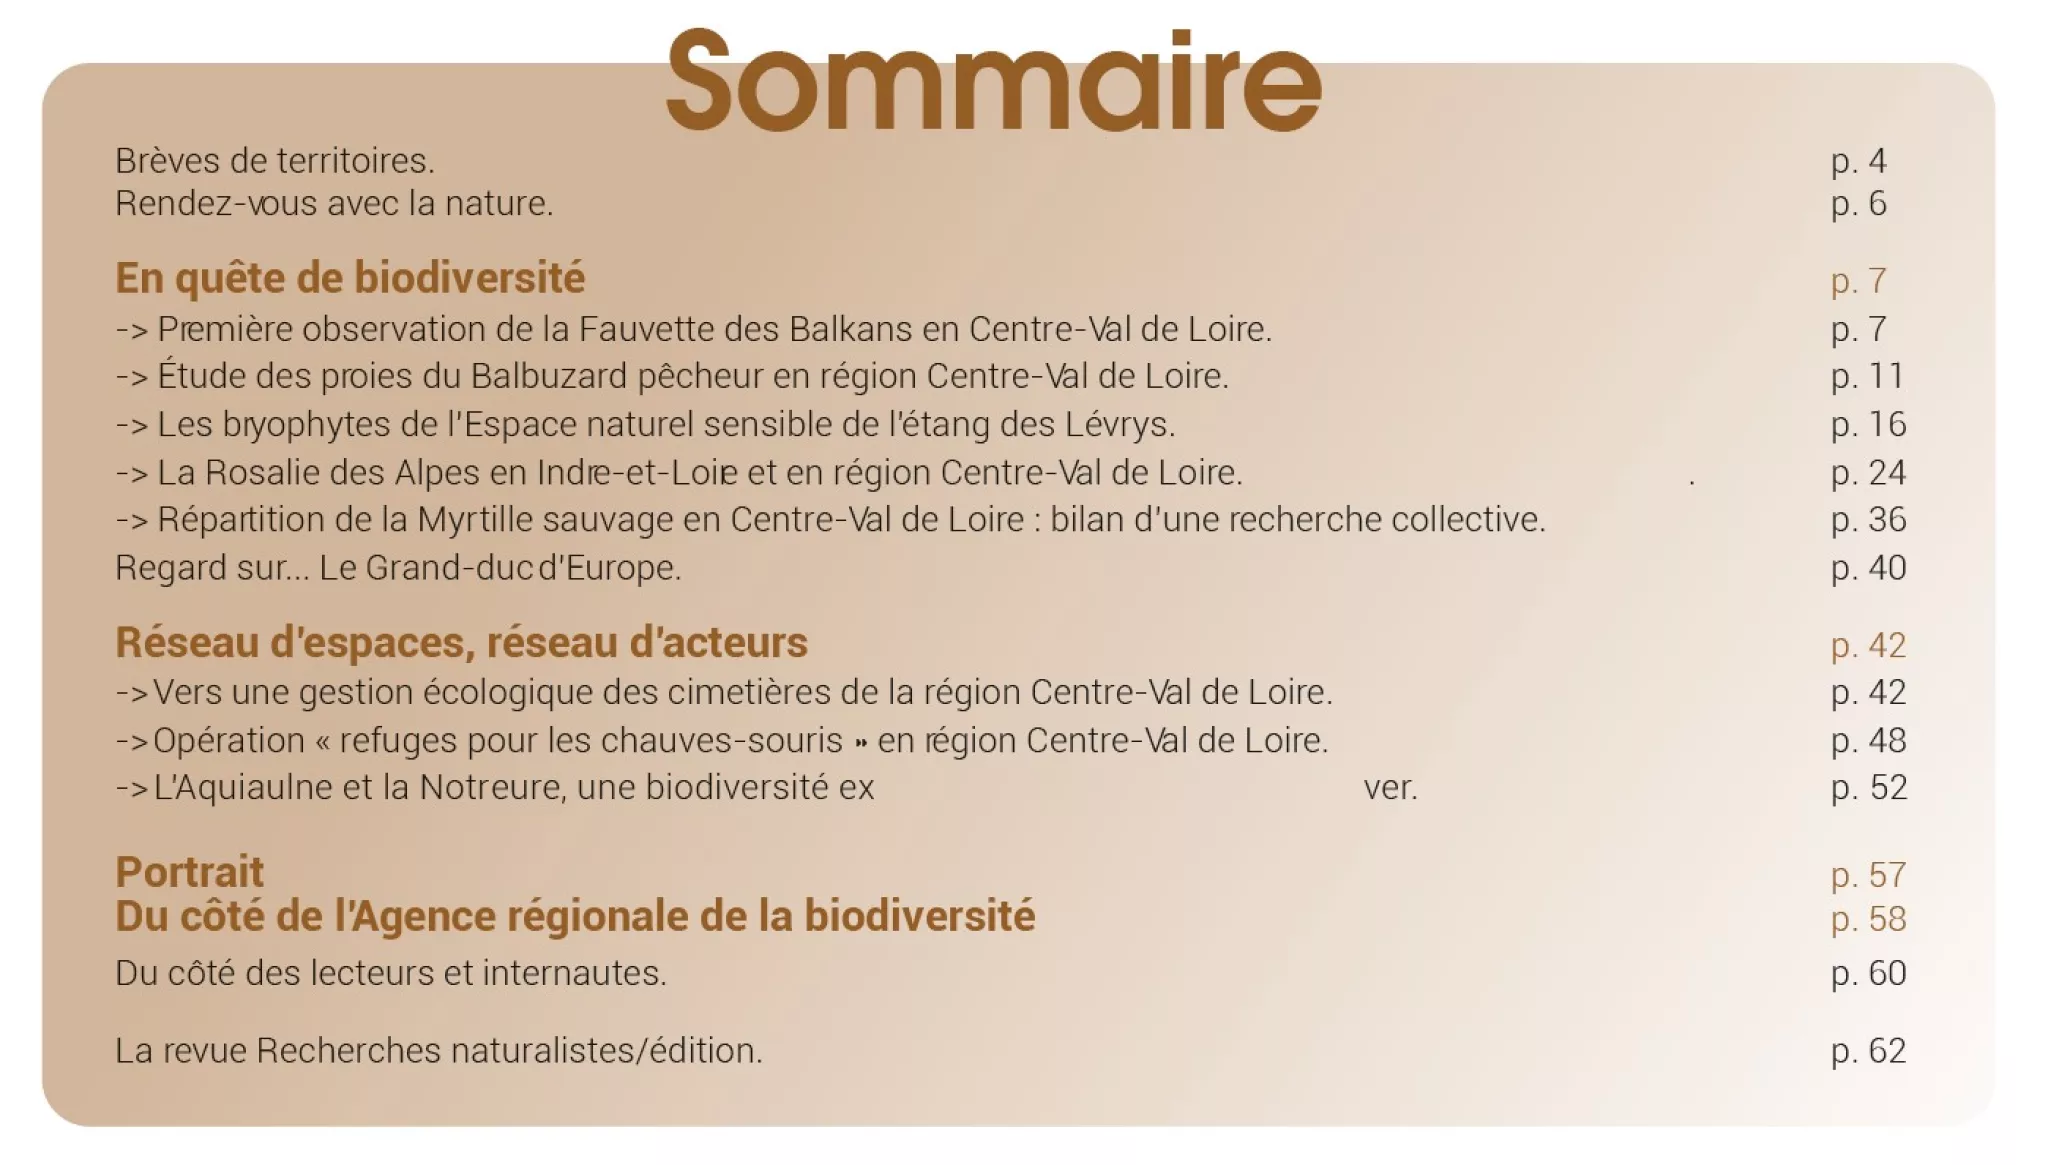 Sommaire RN 11